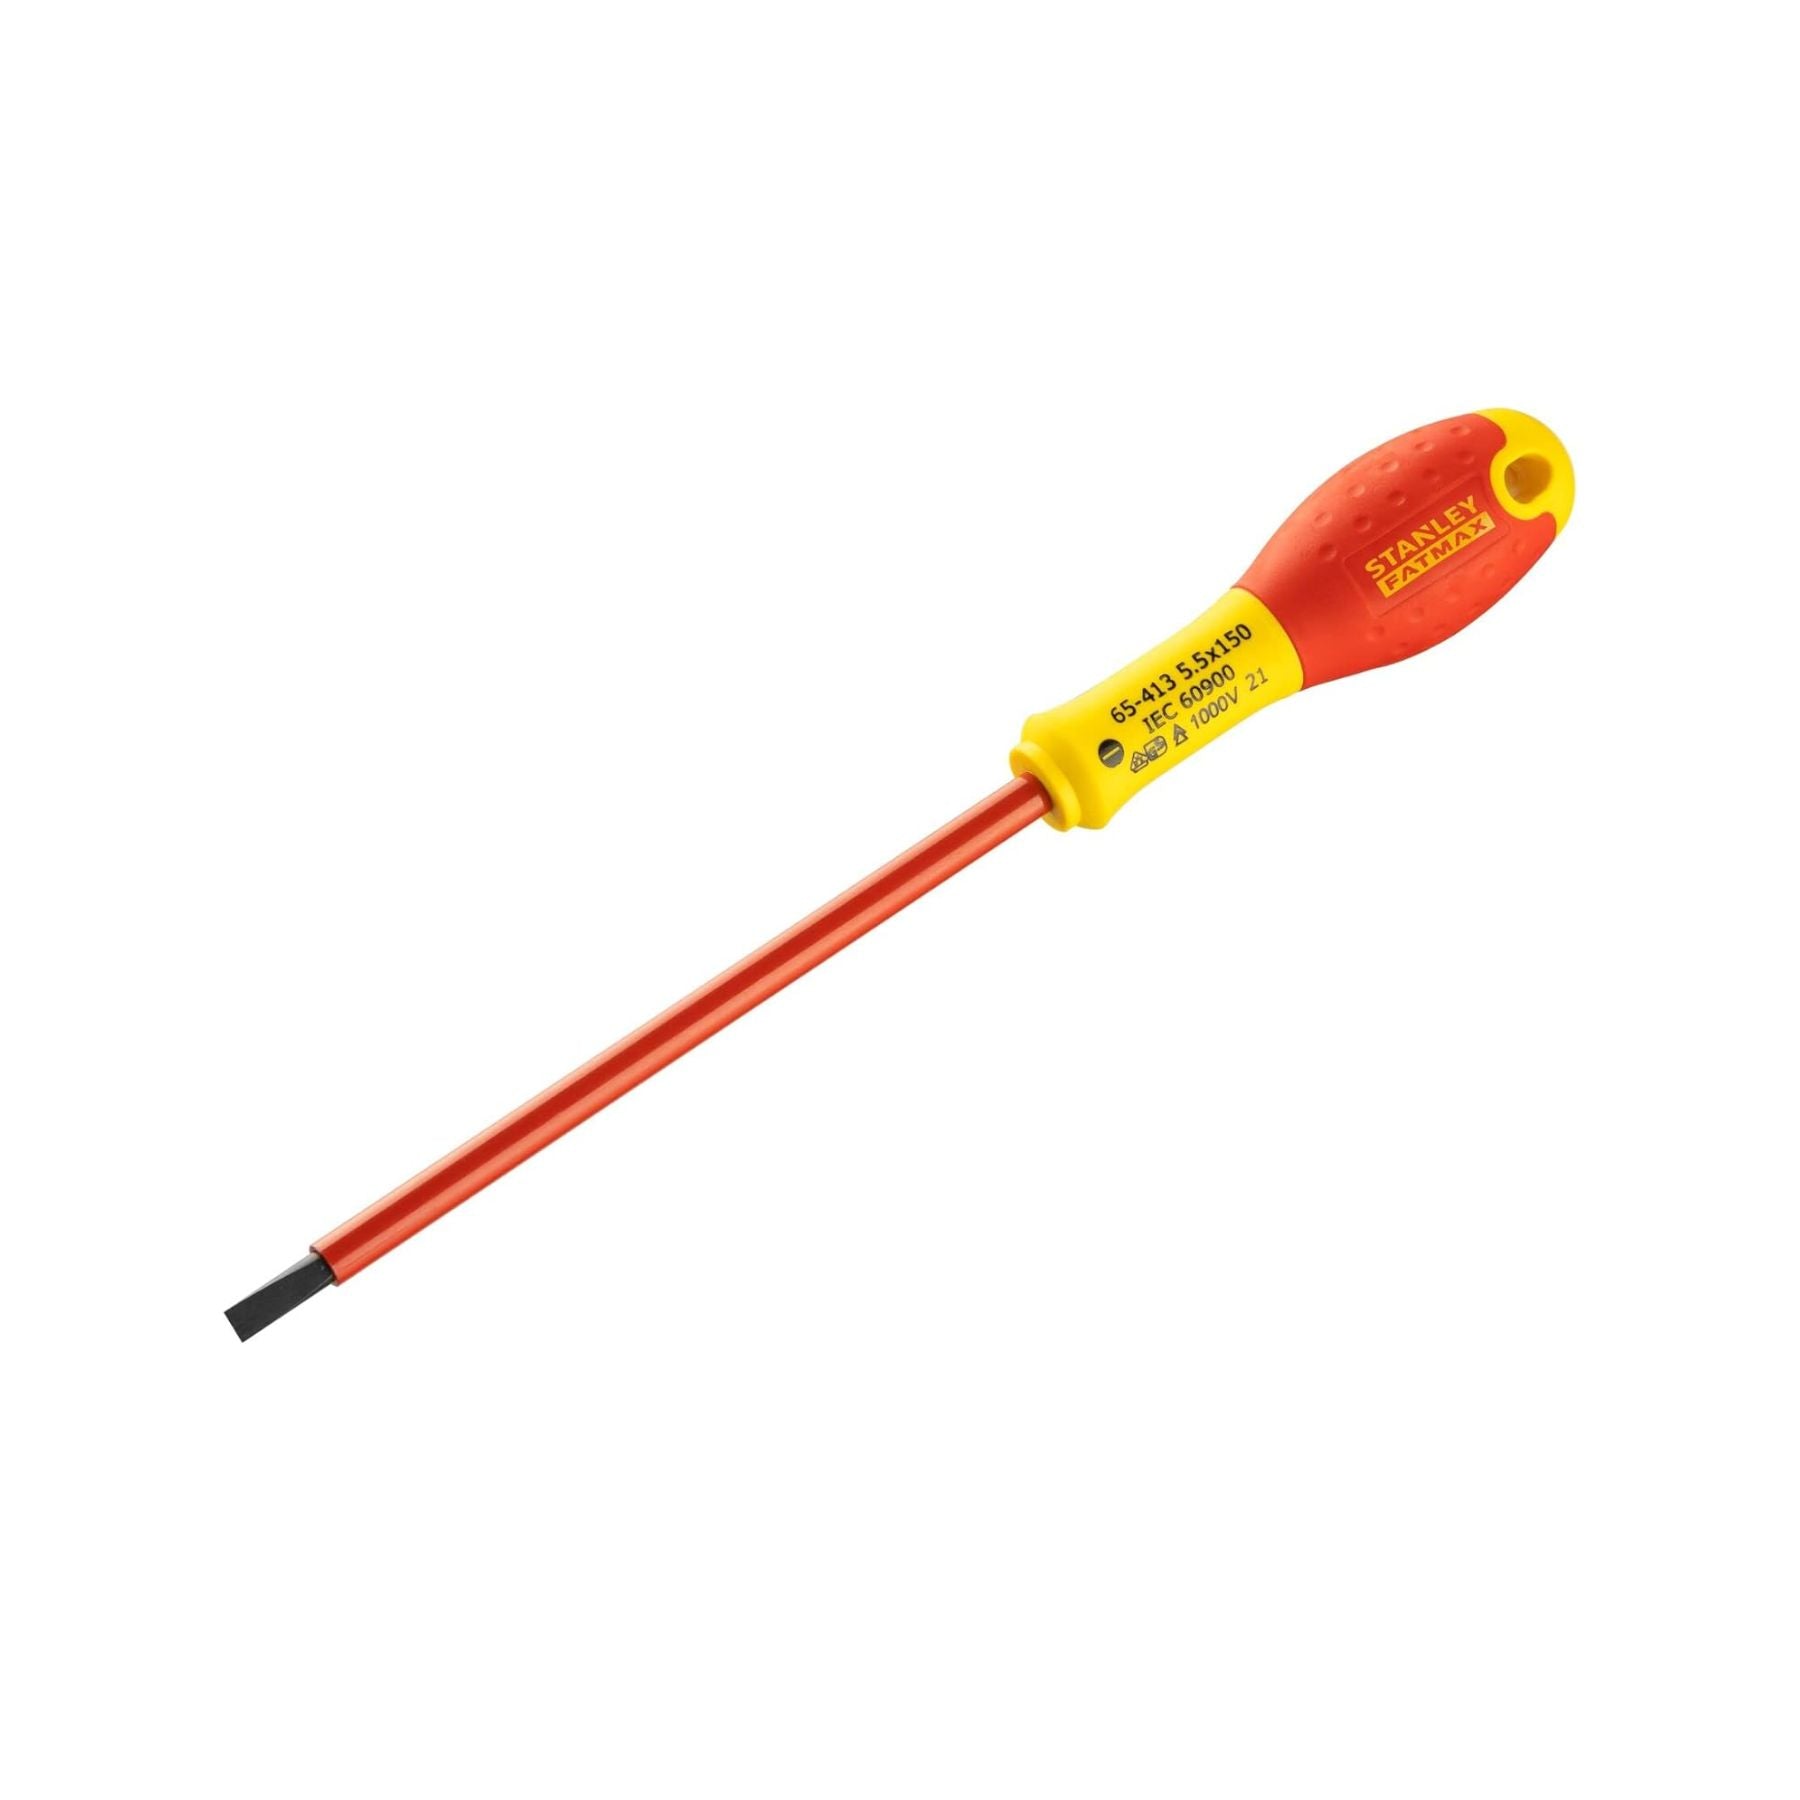 Stanley 0-65-413 VDE Screwdriver , Red/Yellow